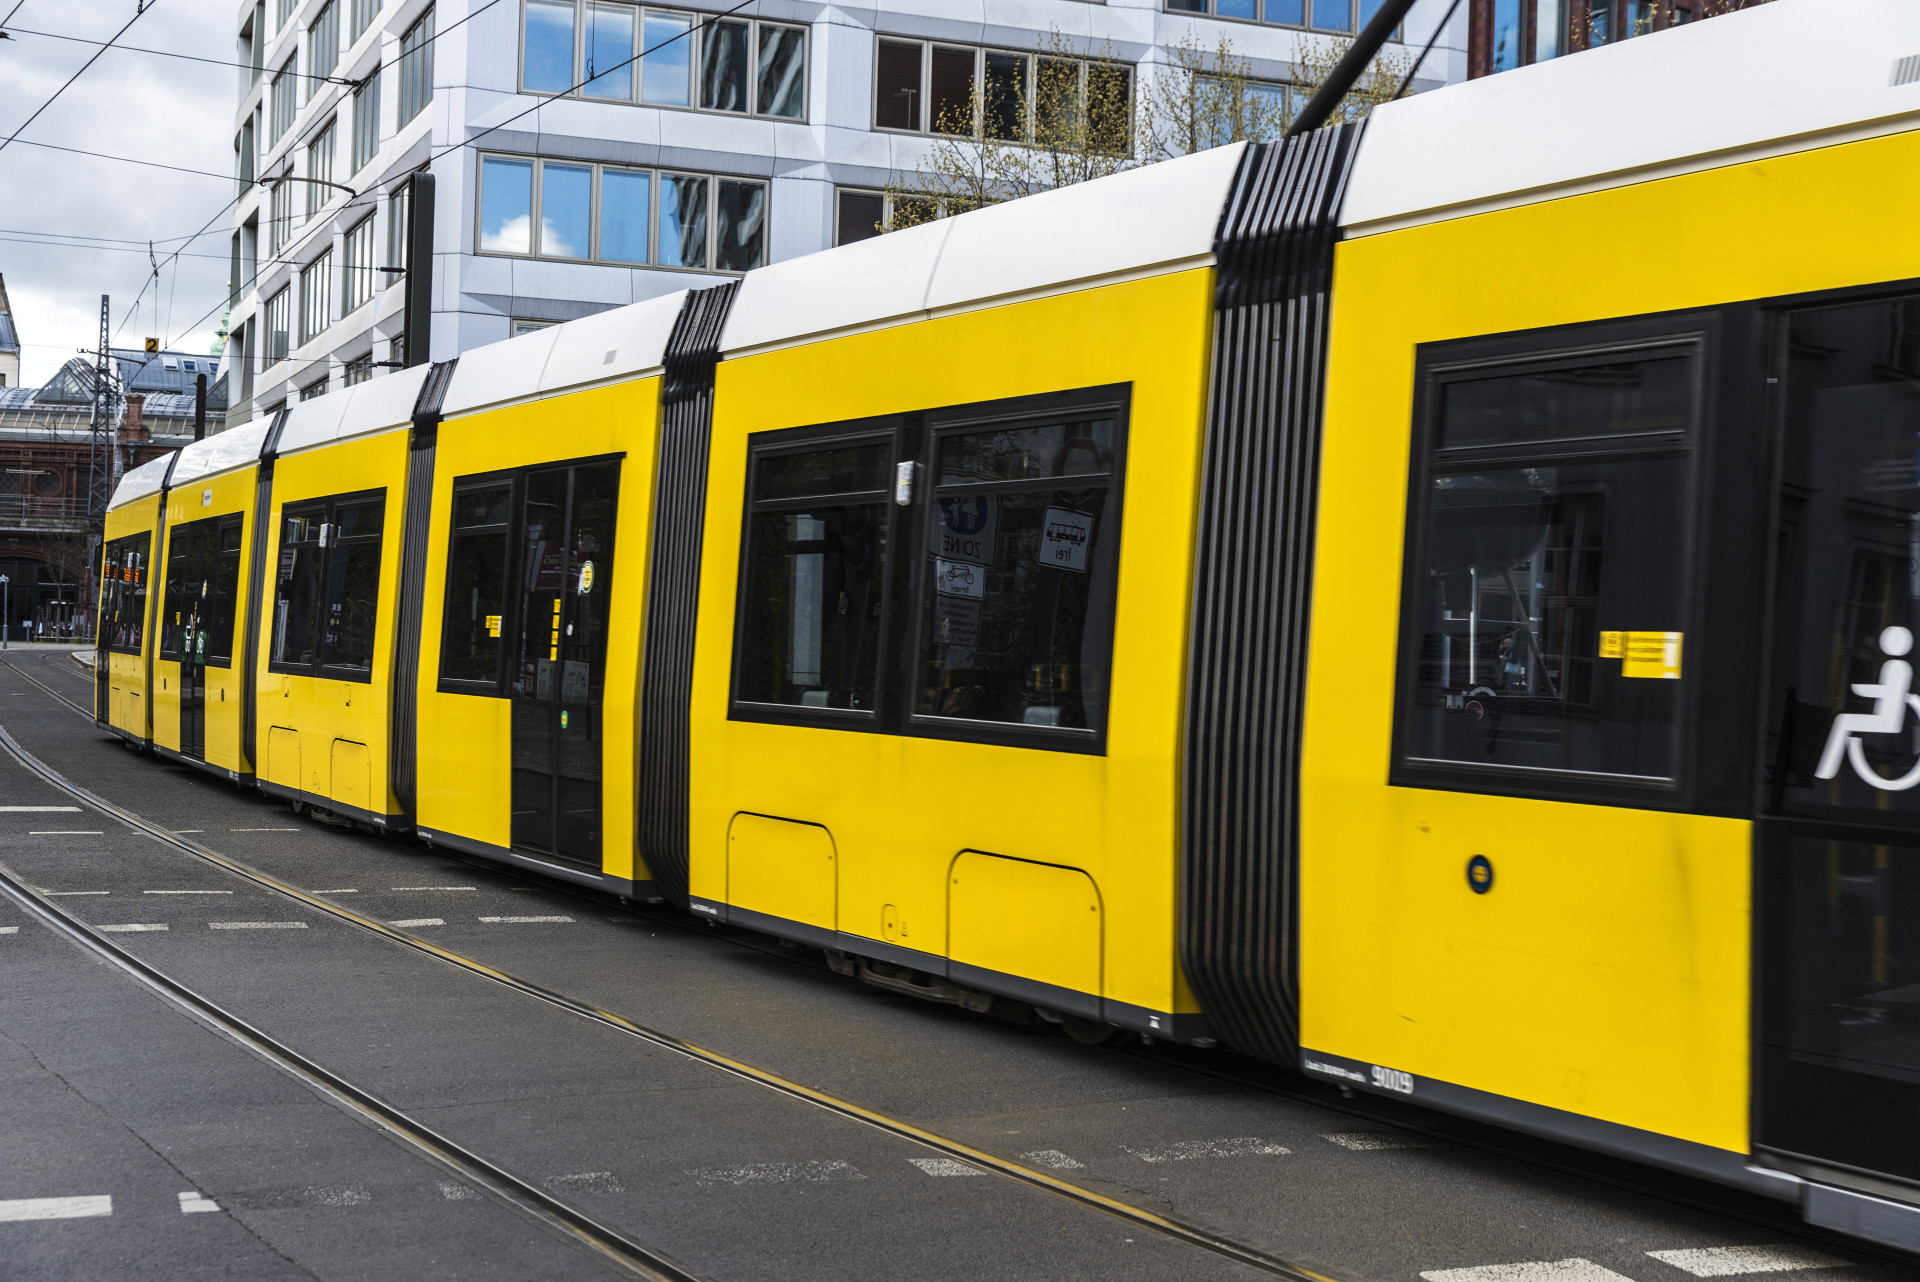 As well as accessible streets and hotels, Berlin's public transport has also been well adapted.<p>You may also like:<a href="https://www.starsinsider.com/n/214686?utm_source=msn.com&utm_medium=display&utm_campaign=referral_description&utm_content=550448en-us"> Indian actors making it big in Hollywood</a></p>